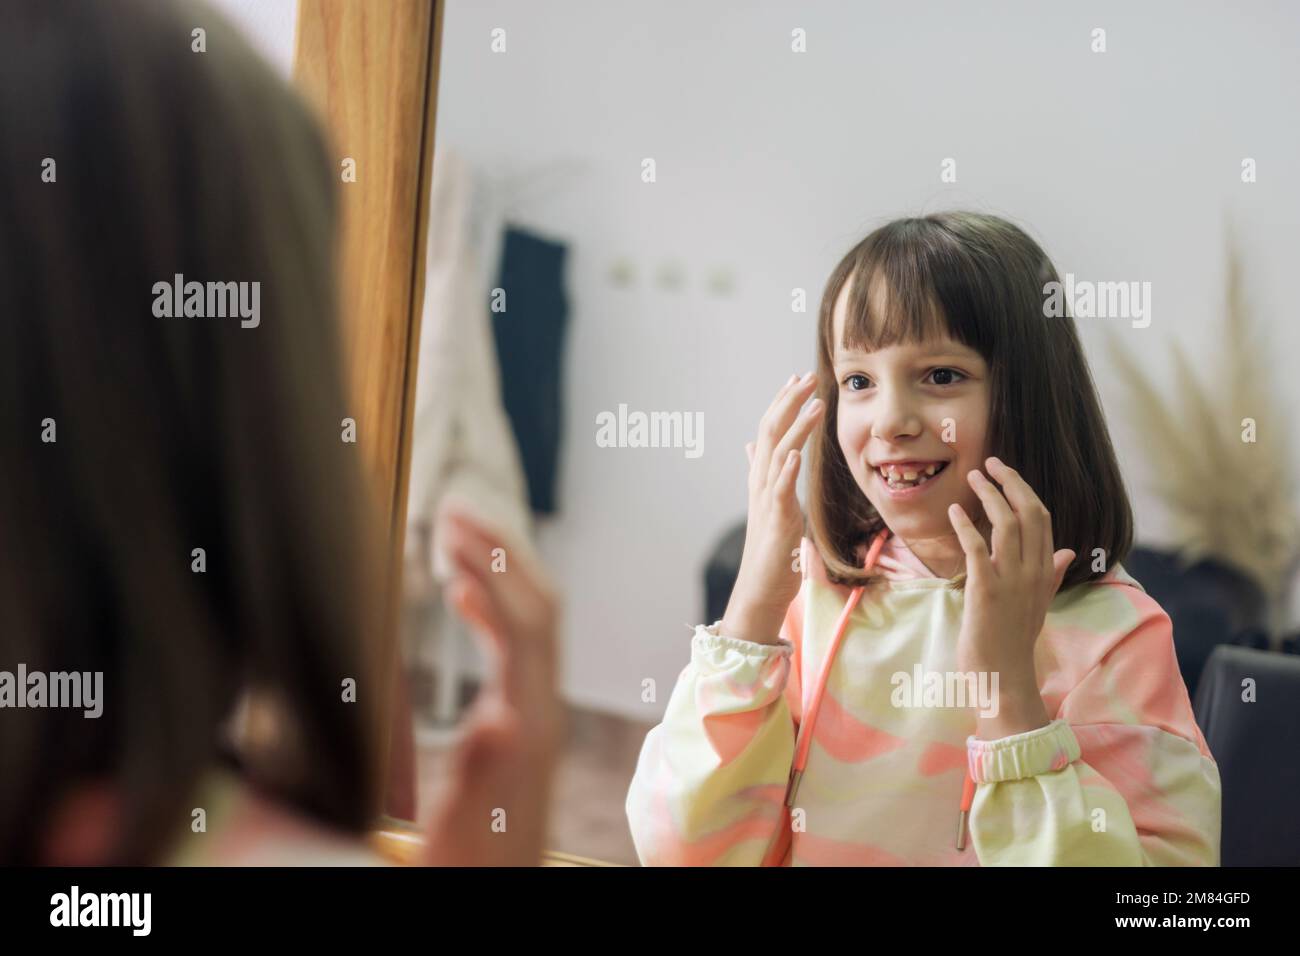 Girl whit new hairstyle in hair salon looking her self in a mirror. She have a bangs. Stock Photo